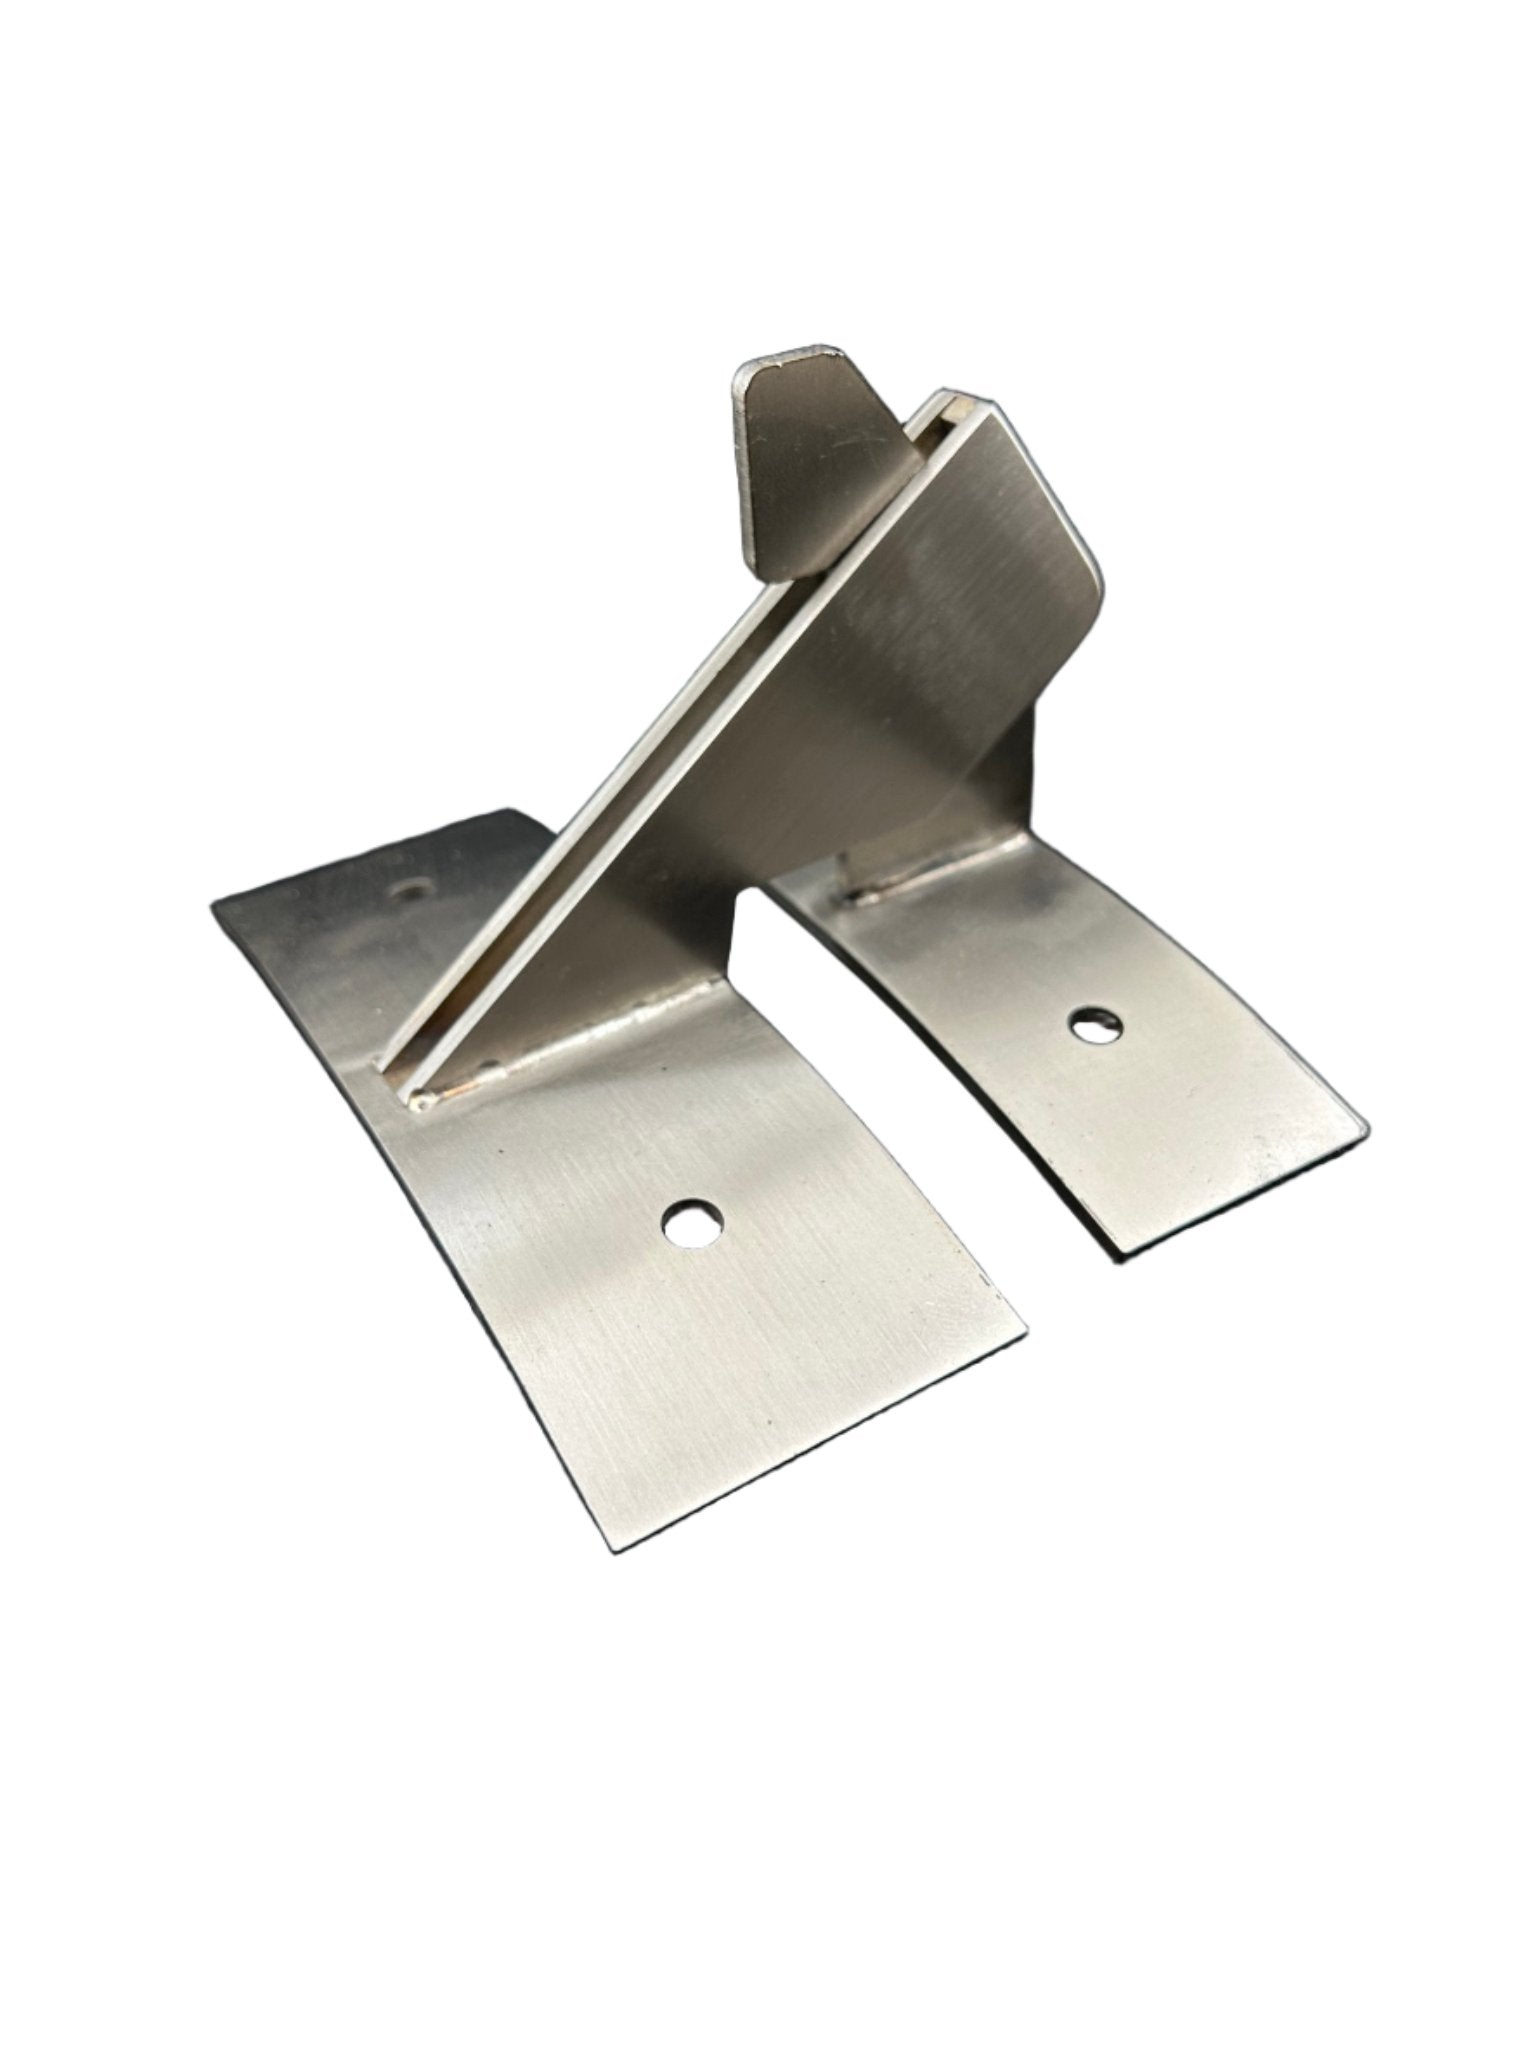 Stainless Steel WSM Hinge & Clip: The Perfect Way to Improve Your WSM - Hunsaker Vortex Smokers